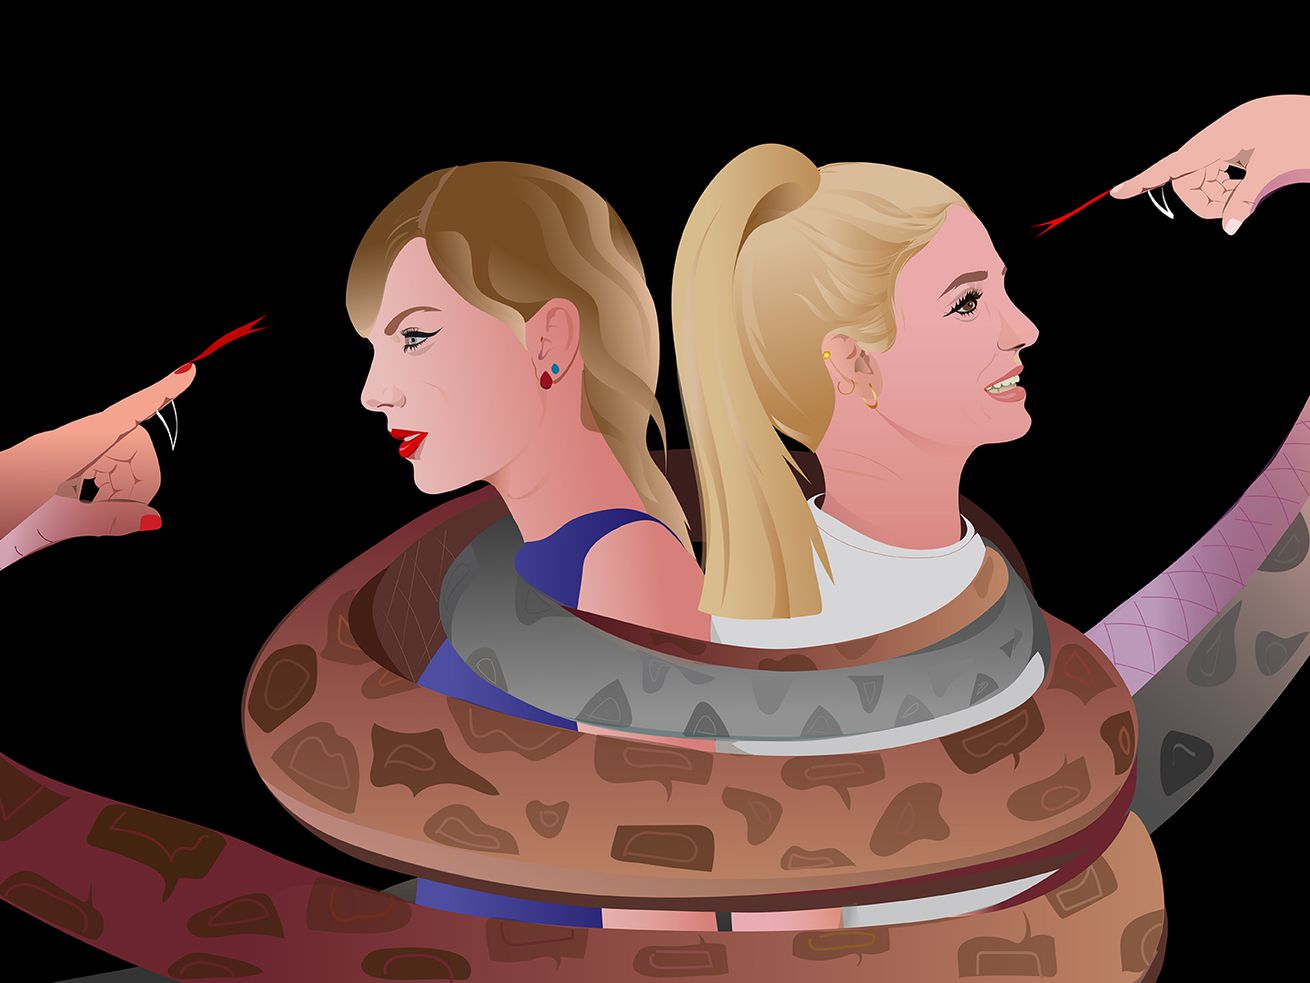 An illustration of Taylor Swift and Britney Spears being tightly wrapped together by boa constrictors. The snakes turn into hands, which are pointing fingers in the faces of the two women.